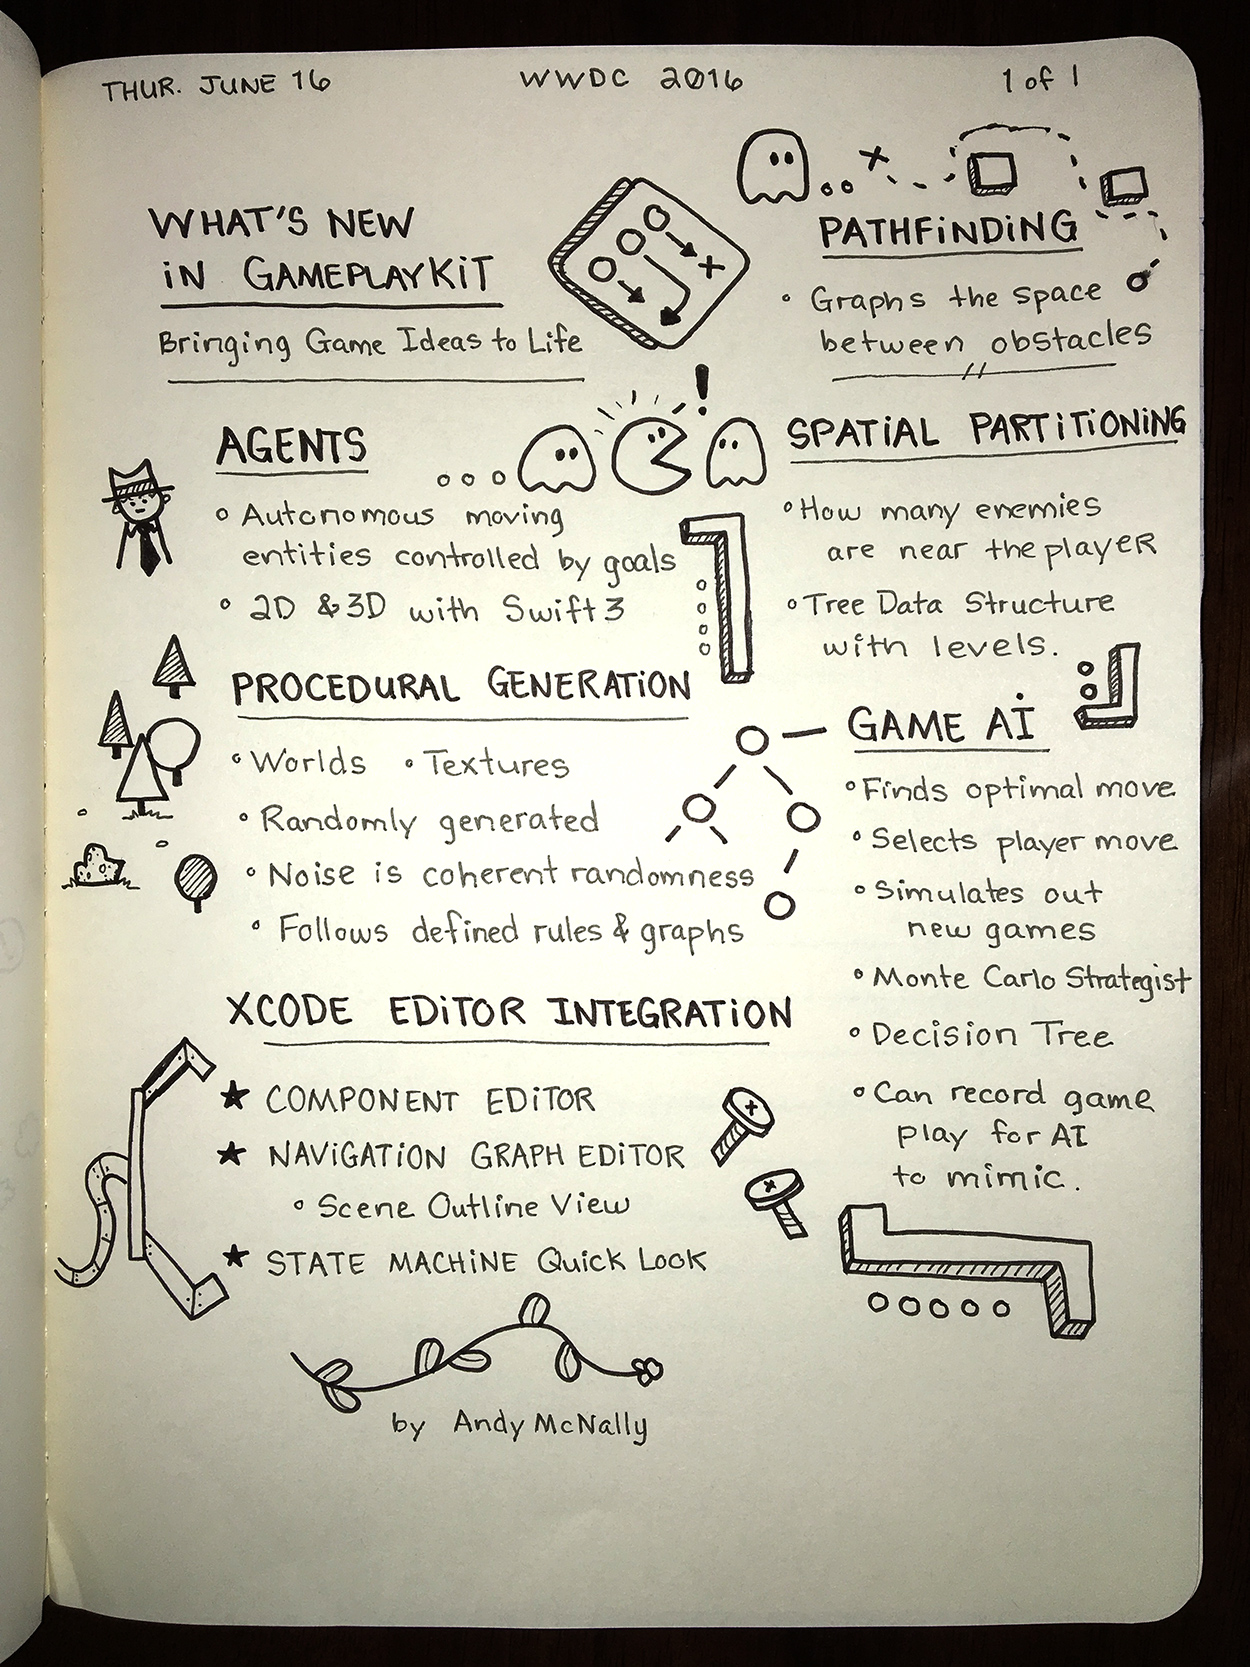 WWDC sketchnotes - What's New in GamePlayKit